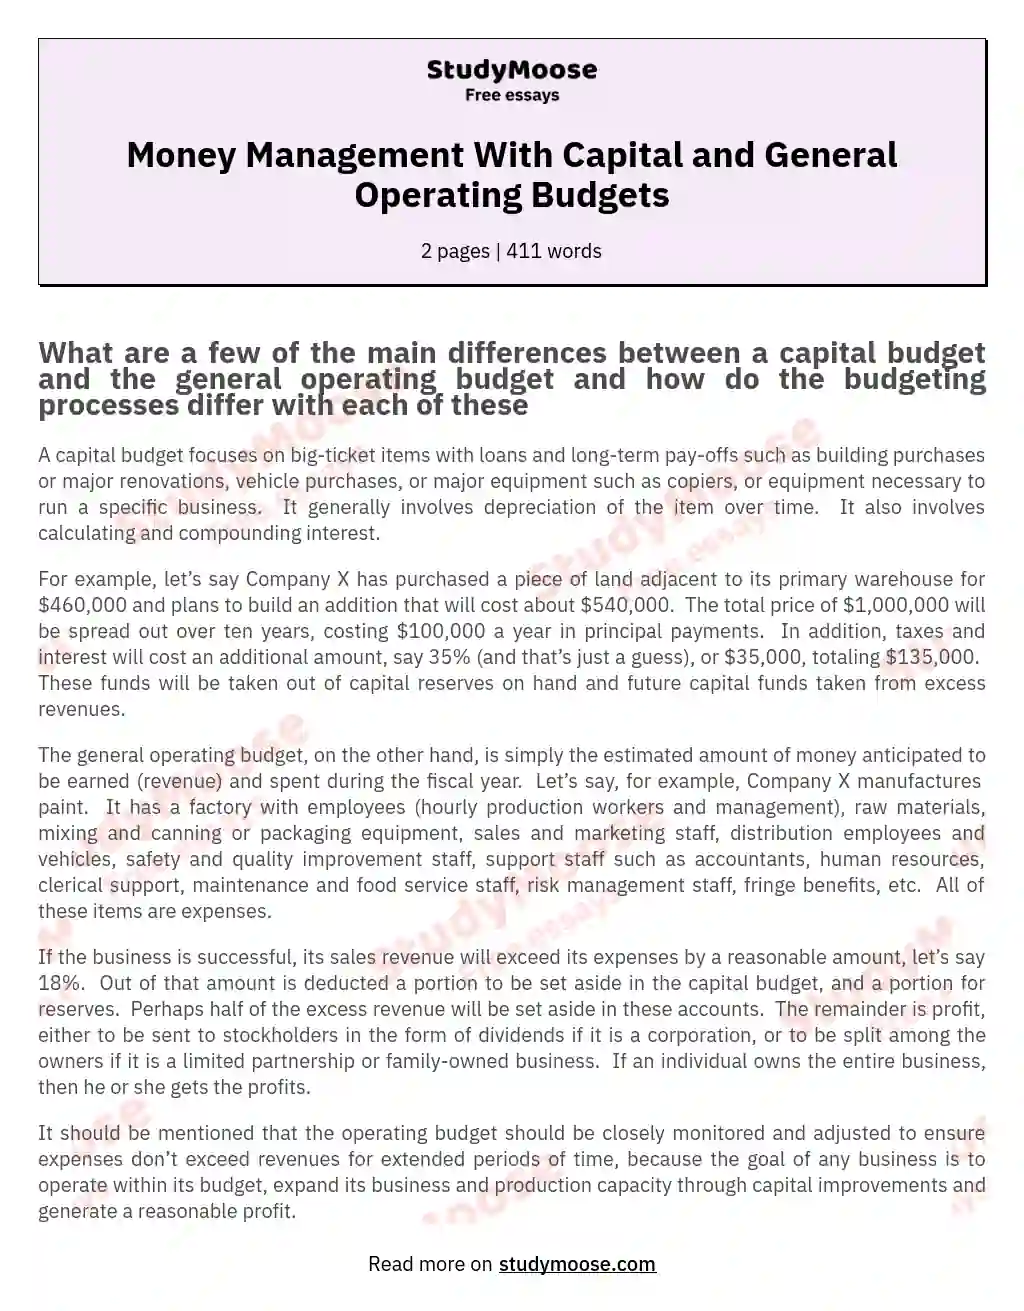 Money Management With Capital and General Operating Budgets essay